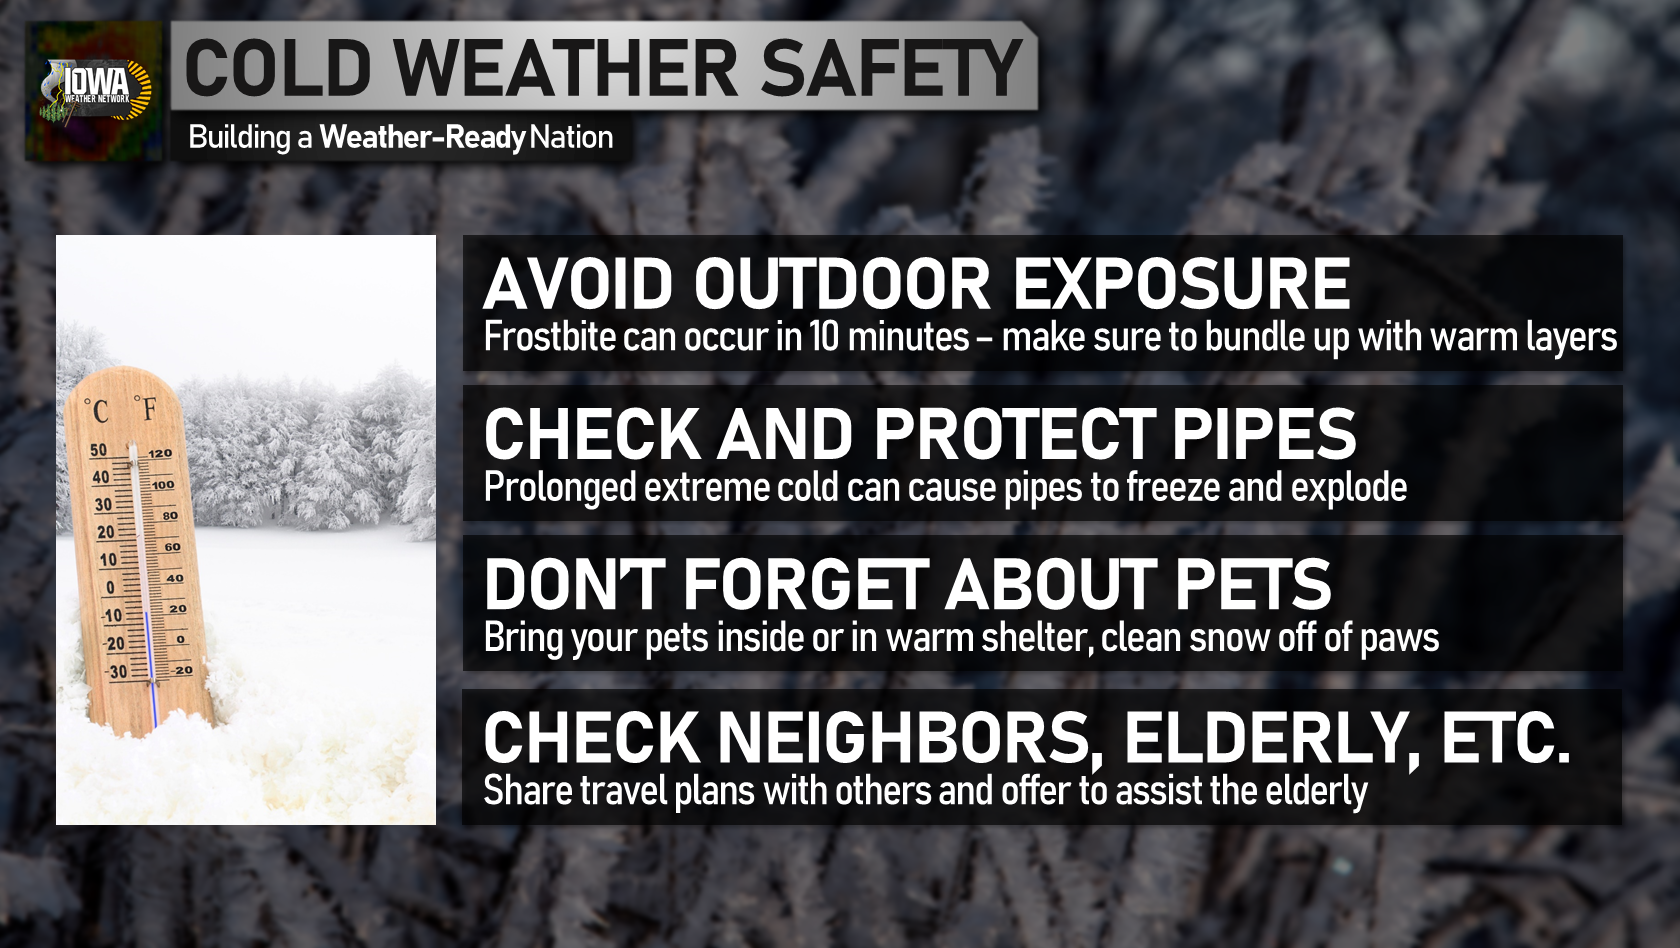 Cold weather safety tips